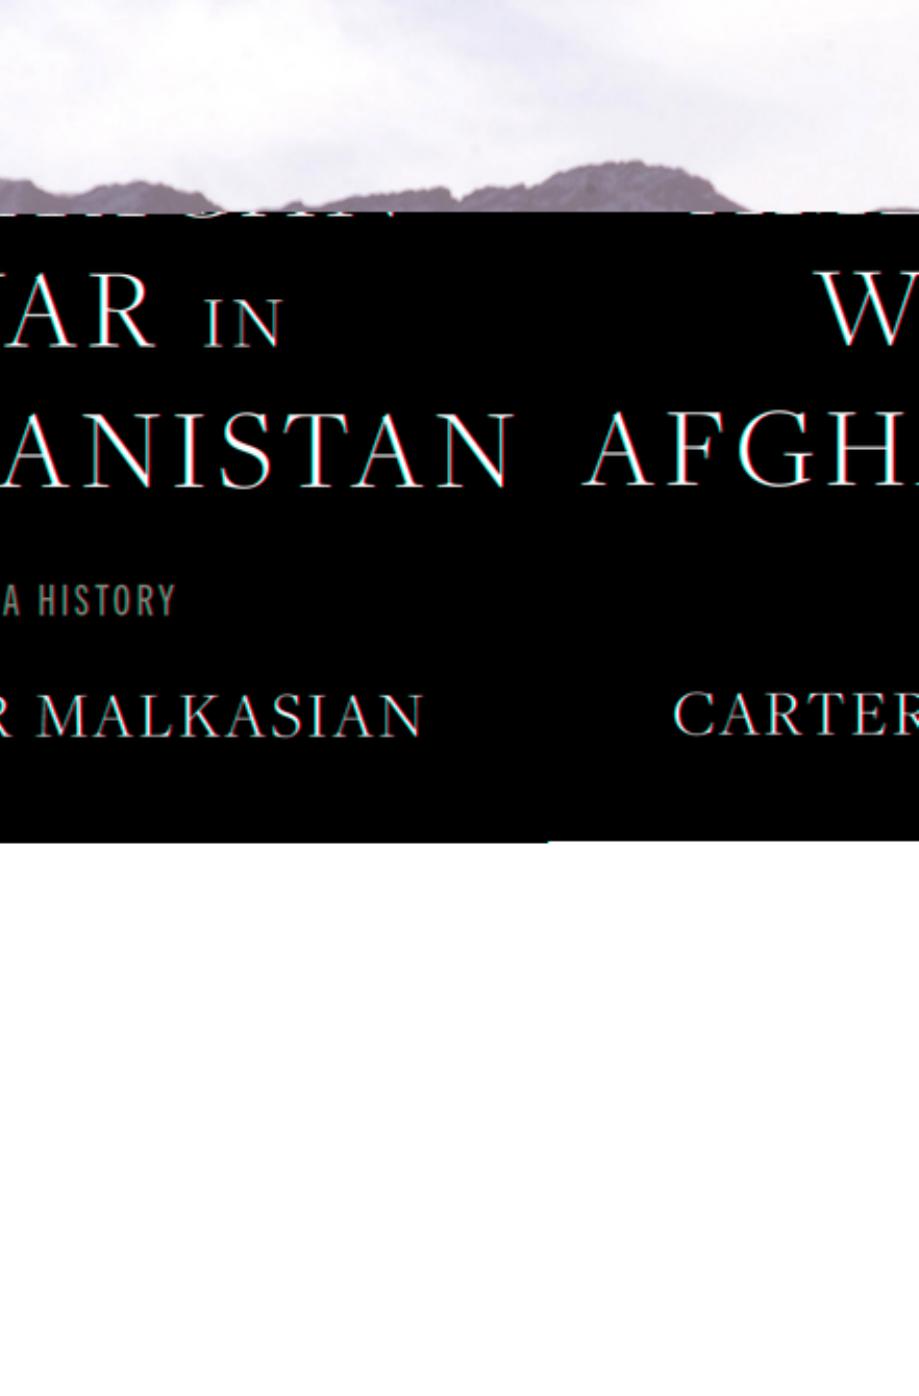 The American War in Afghanistan by Carter Malkasian